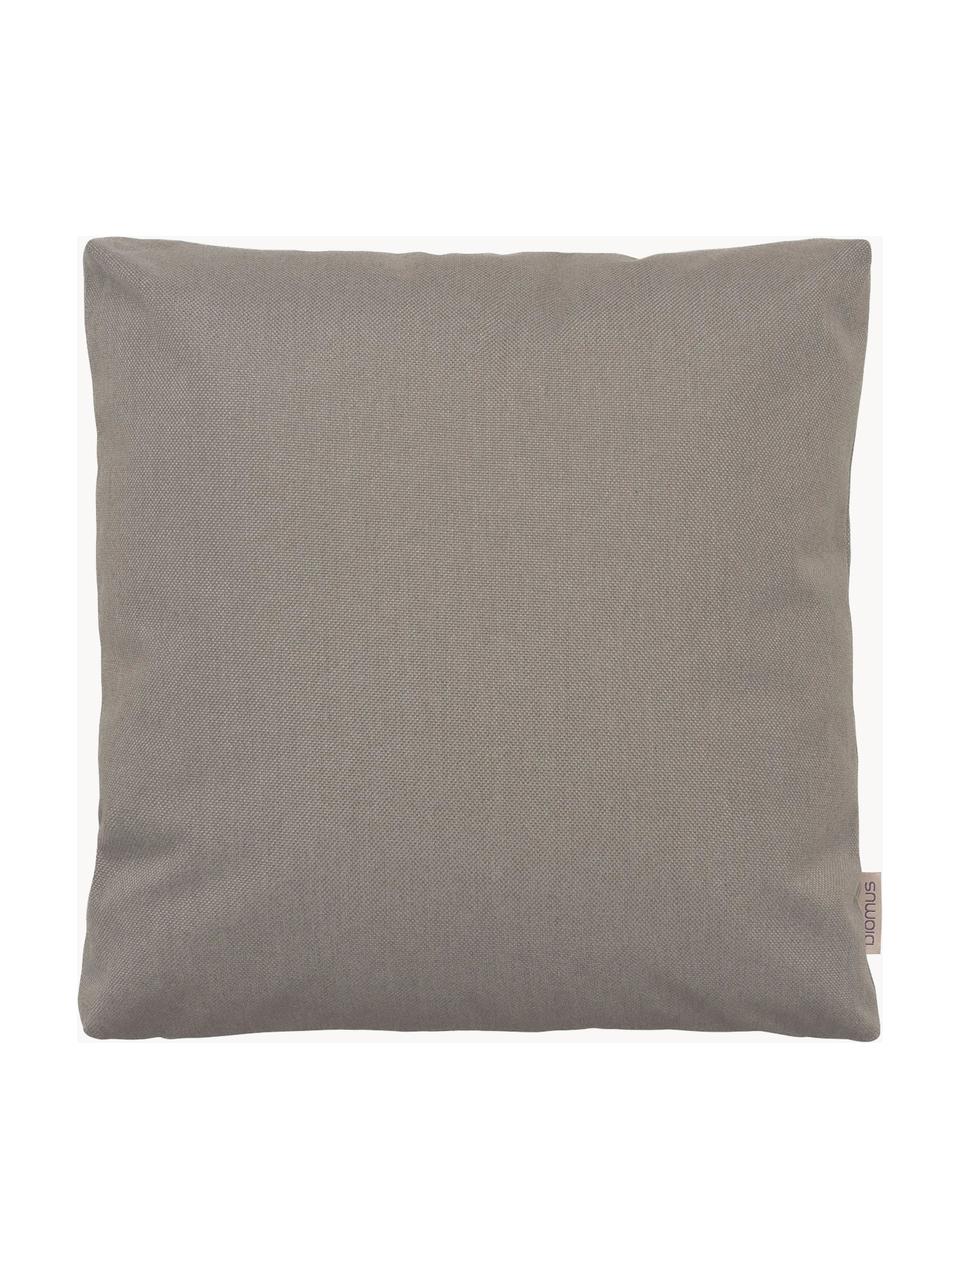 Outdoor-Kissen Stay, Hülle: 100 % Polyester, wetterfe, Taupe, B 30 x L 70 cm